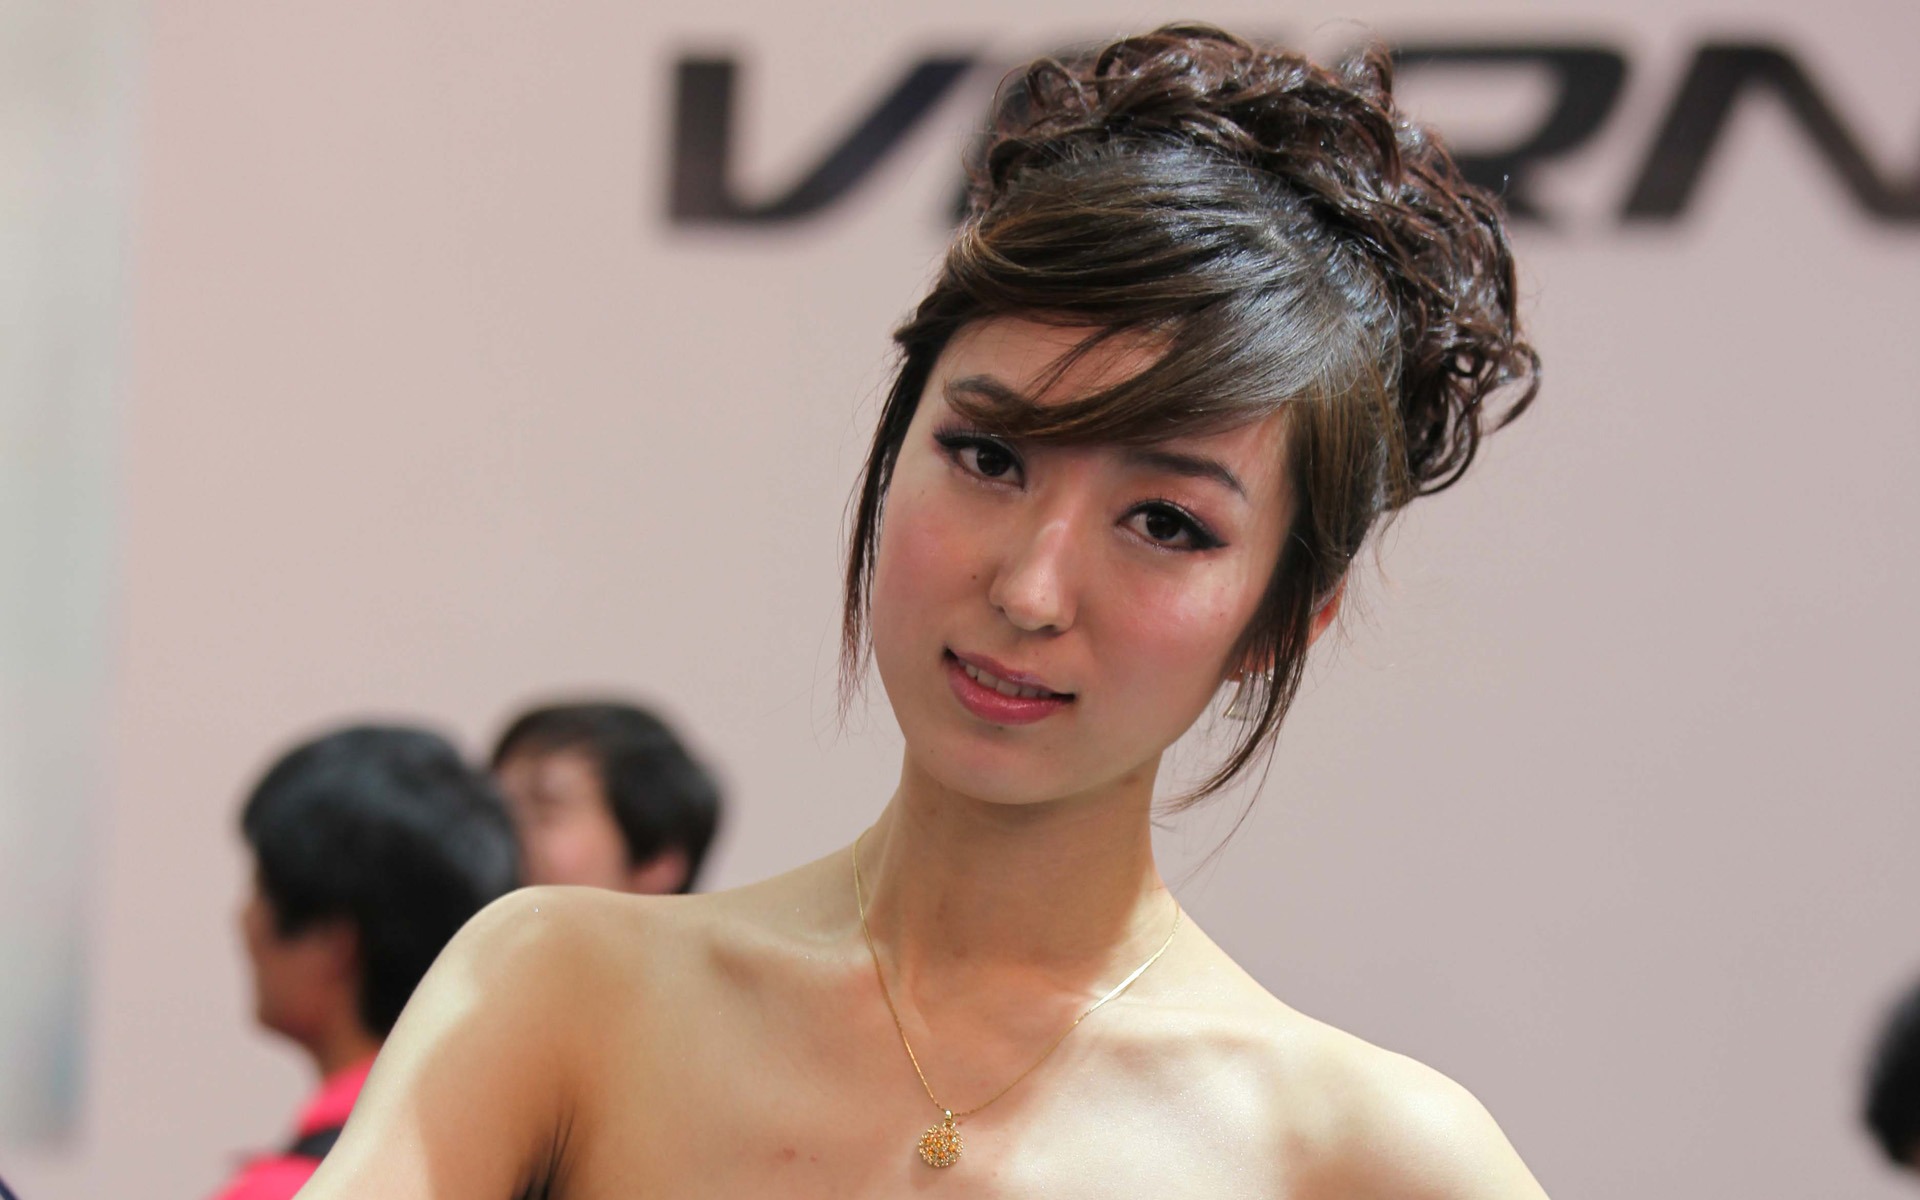 2010 Beijing International Auto Show beauty (2) (the wind chasing the clouds works) #20 - 1920x1200